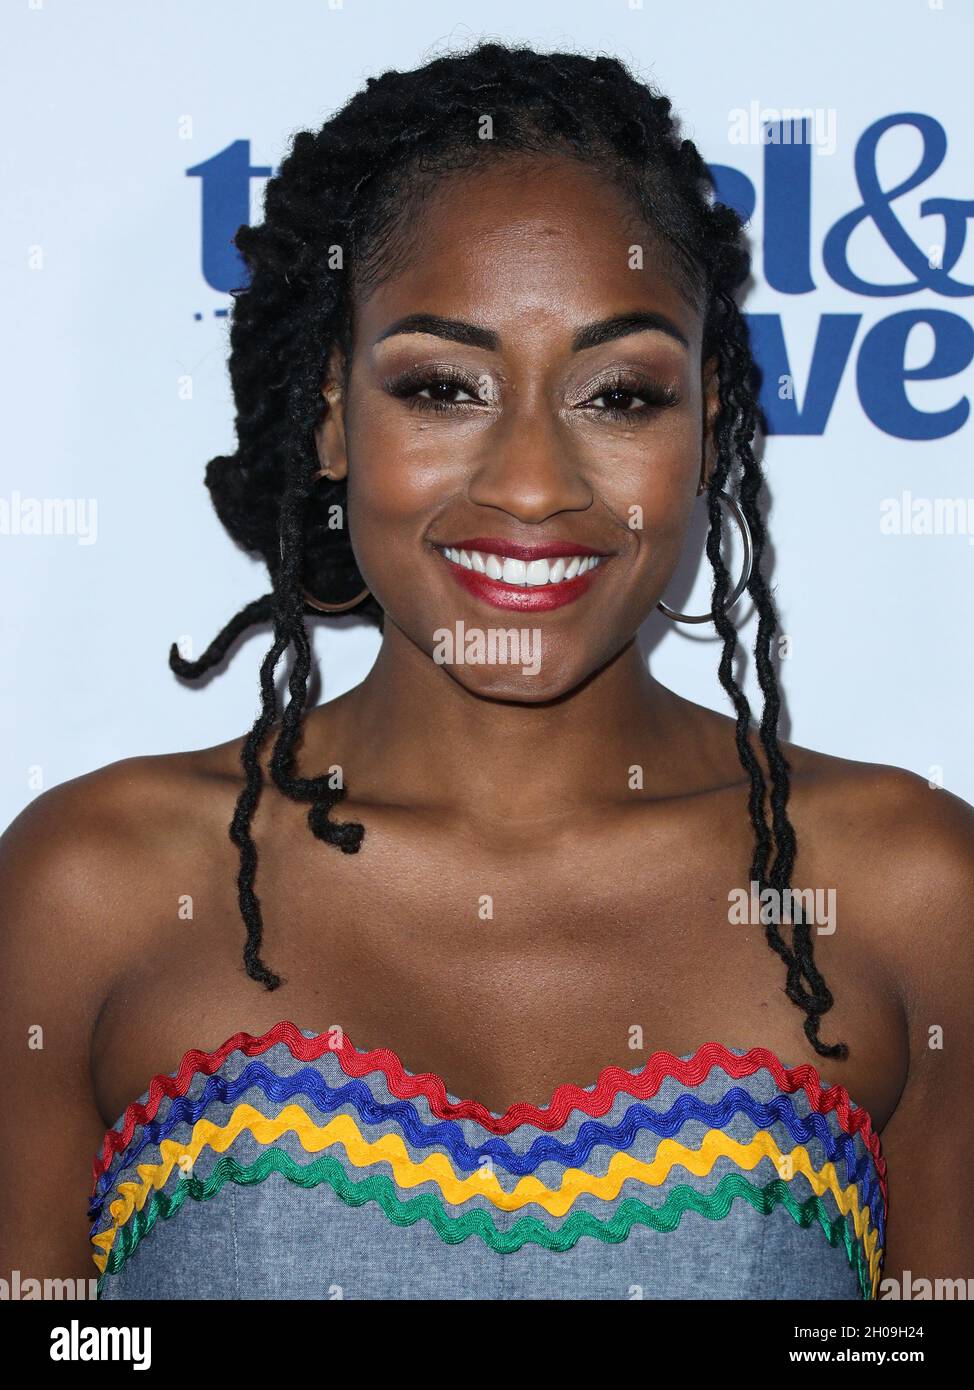 West Hollywood, United States. 11th Oct, 2021. WEST HOLLYWOOD, LOS ANGELES, CALIFORNIA, USA - OCTOBER 11: Kareen Ulysse arrives at Travel and GIVE's 4th Annual 'Travel With A Purpose' Fundraiser With Lisa Vanderpump (Fundraiser to Benefit Teletherapy Program and Communities in Haiti Affected by Earthquake) held at TOM TOM Restaurant and Bar on October 11, 2021 in West Hollywood, Los Angeles, California, United States. (Photo by Xavier Collin/Image Press Agency) Credit: Image Press Agency/Alamy Live News Stock Photo